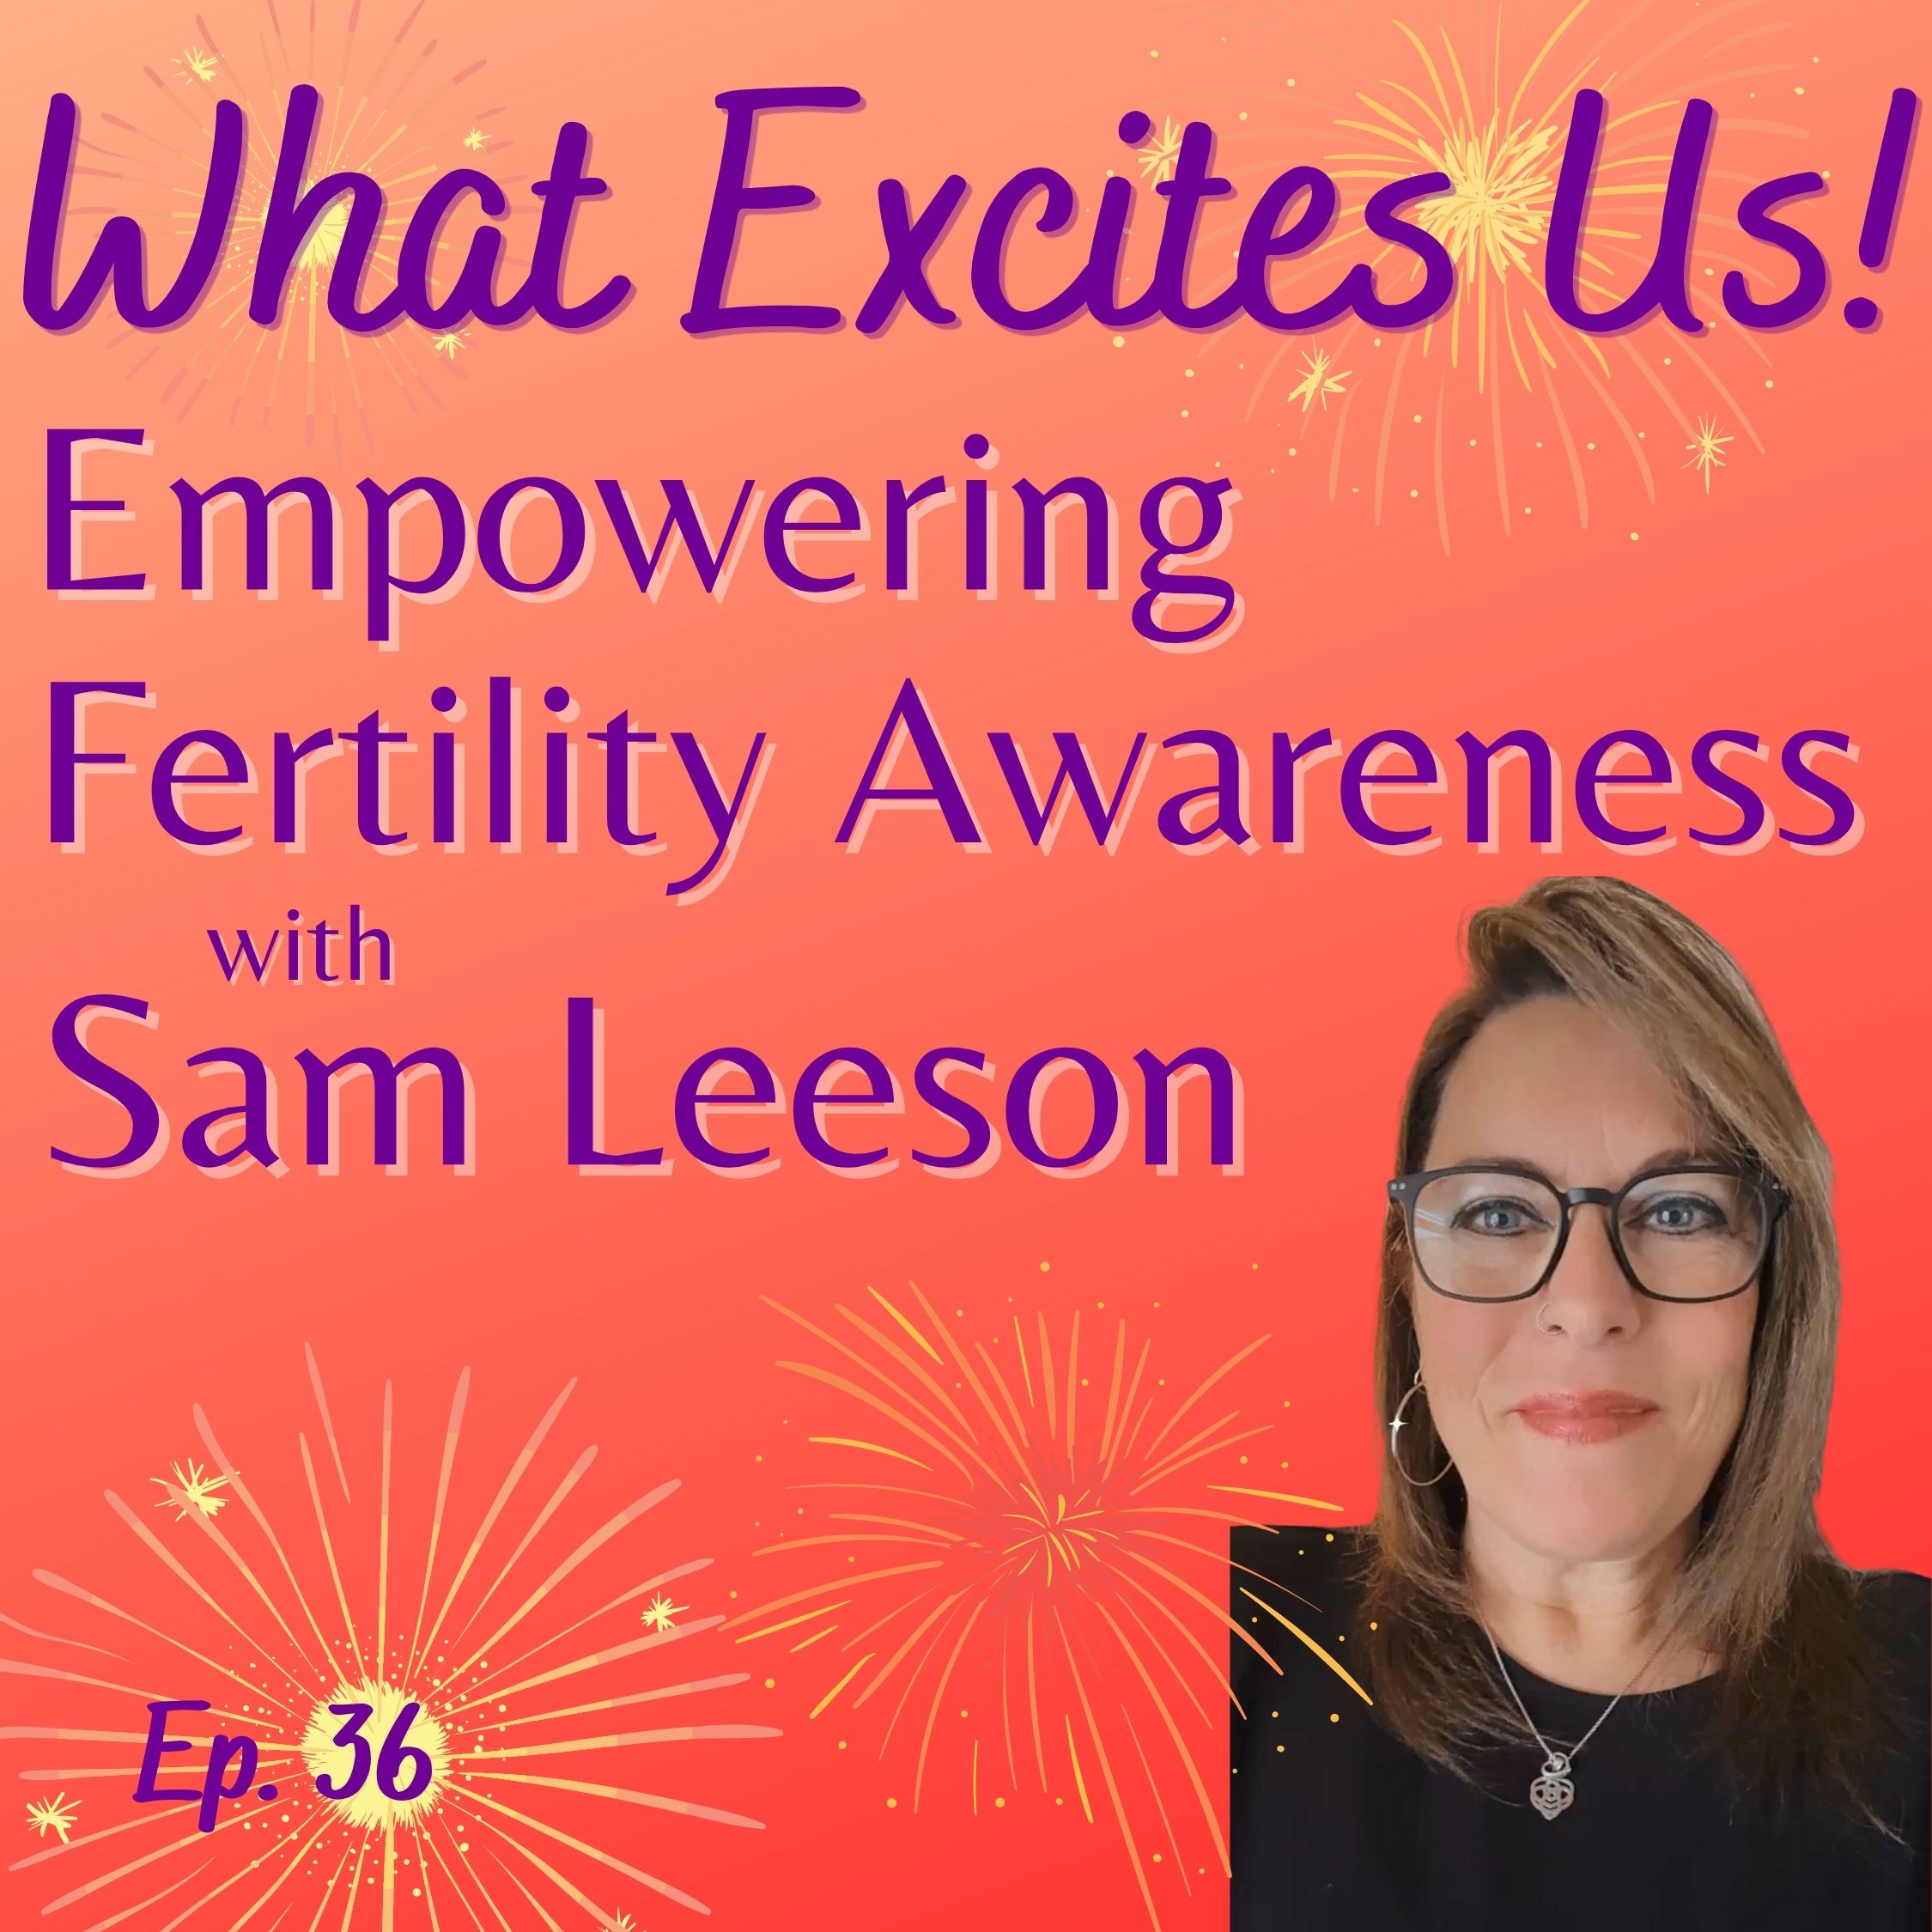  - Empowering Fertility Awareness with Sam Leeson